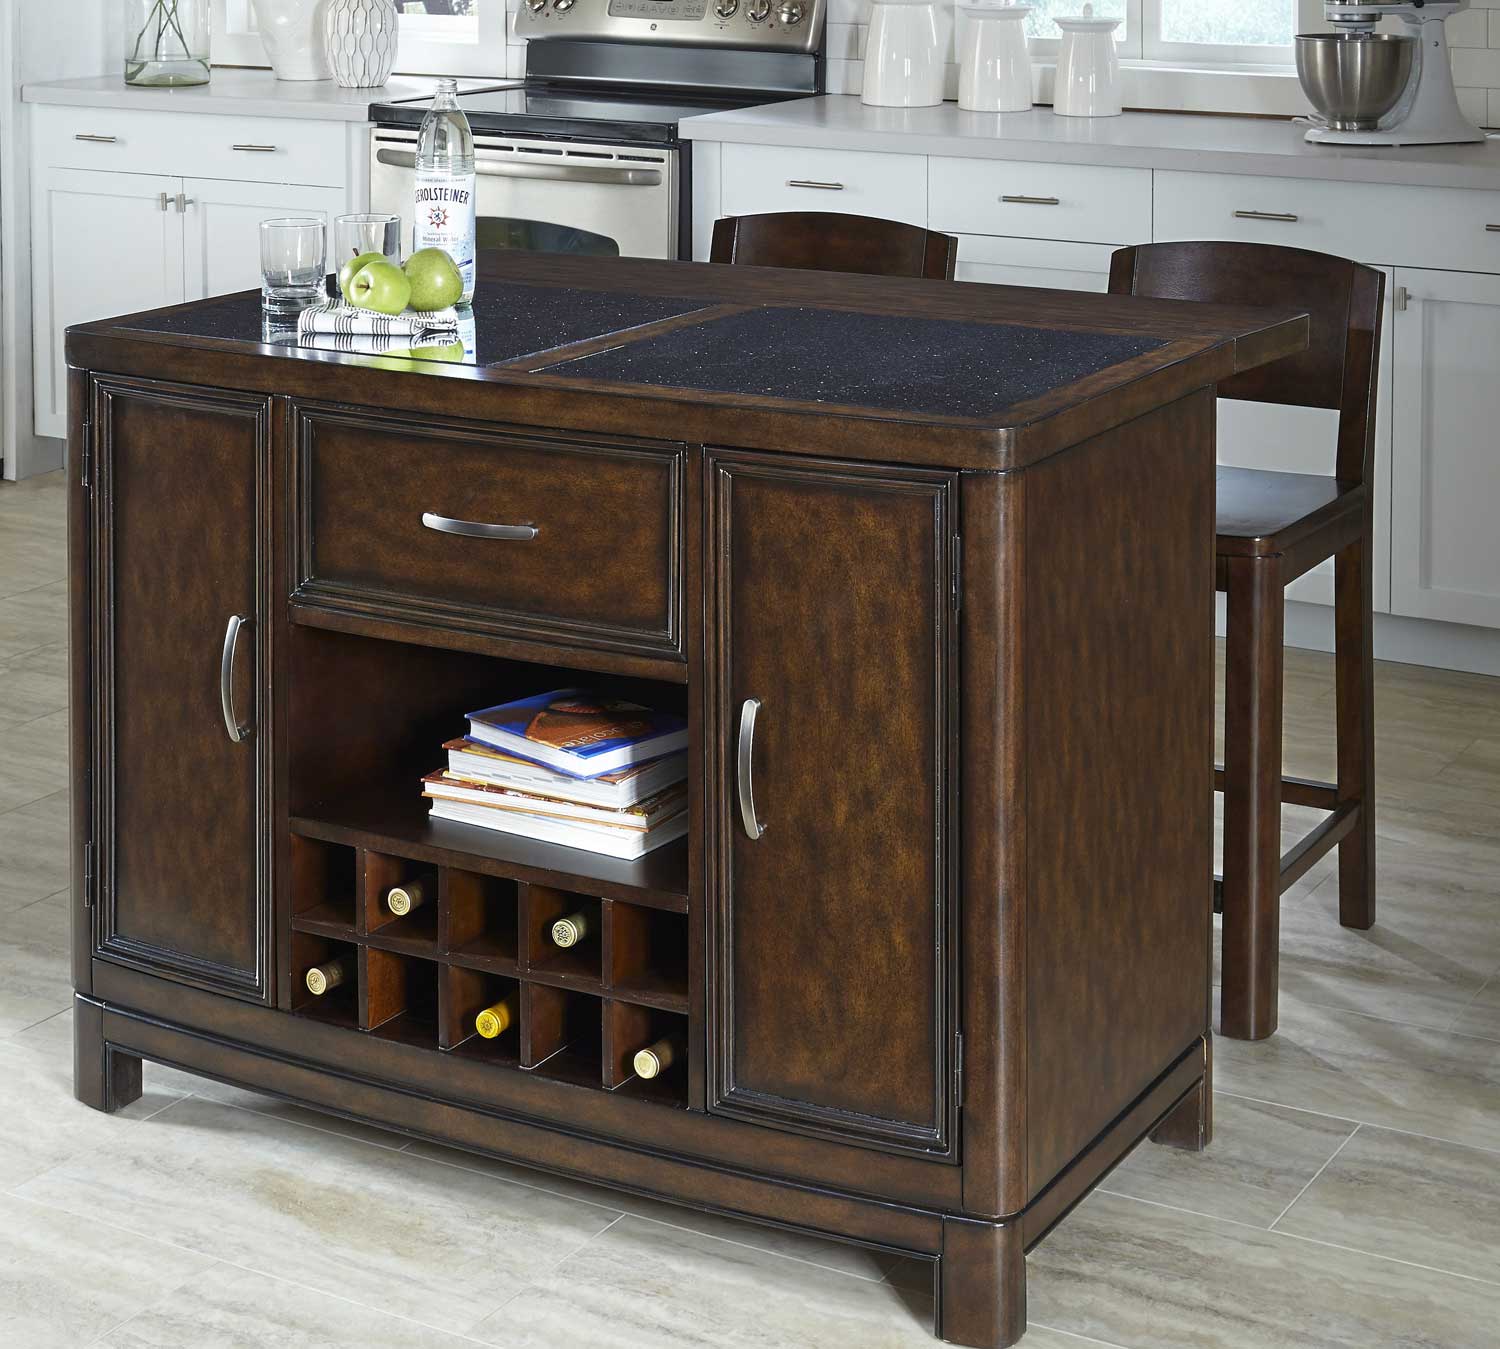 Home Styles Crescent Hill Kitchen Island with Granite Top and Two Stools - Two-tone tortoise shell